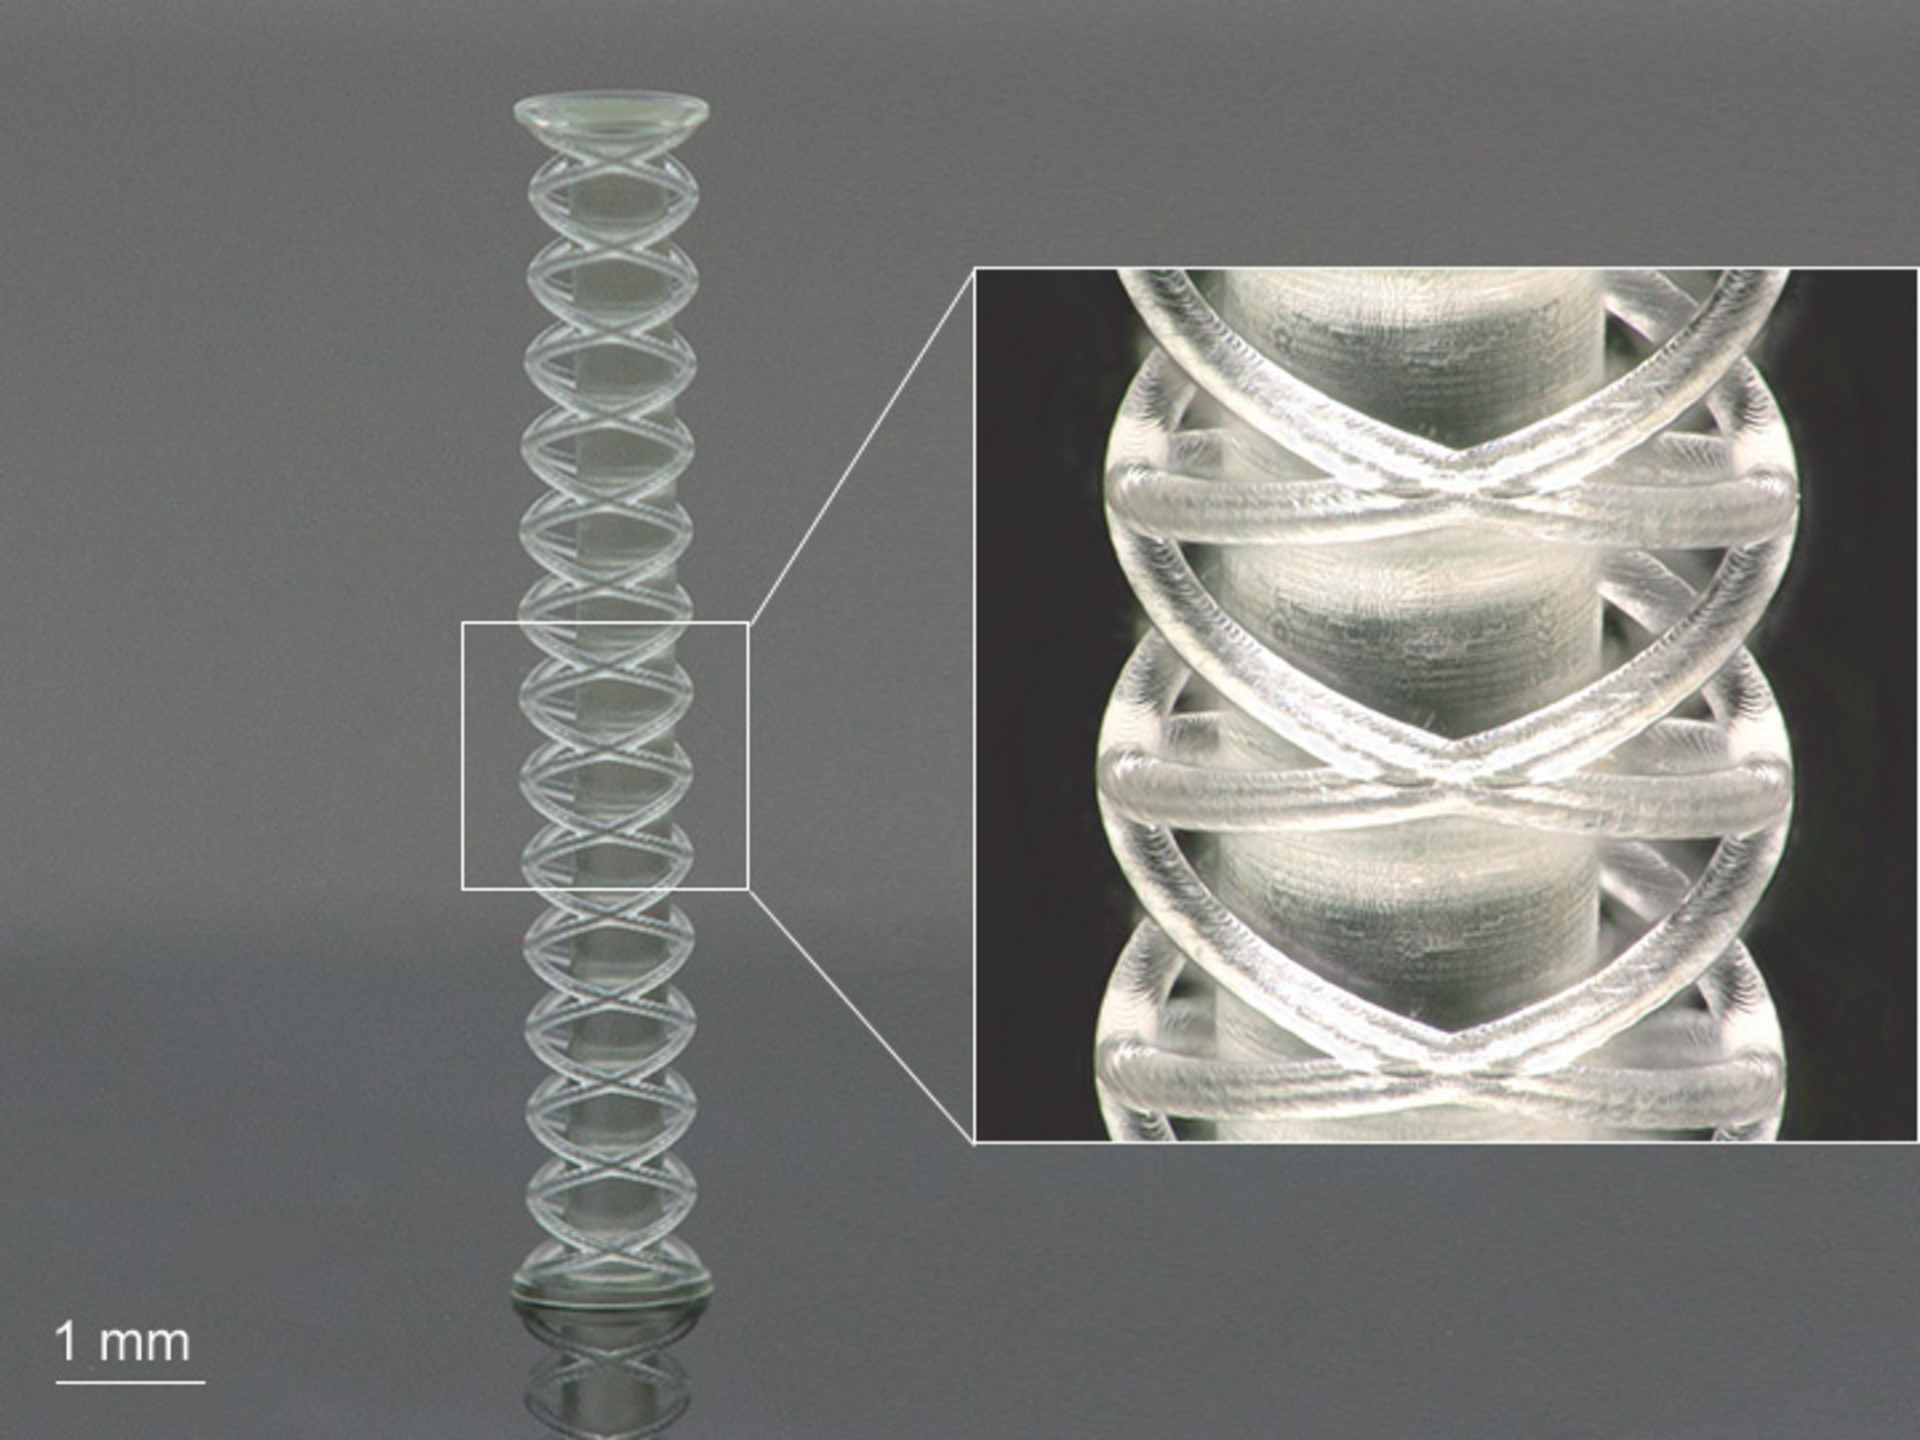 3D-printed double helix fabricated with Nanoscribe's 3D Microfabrication tool.